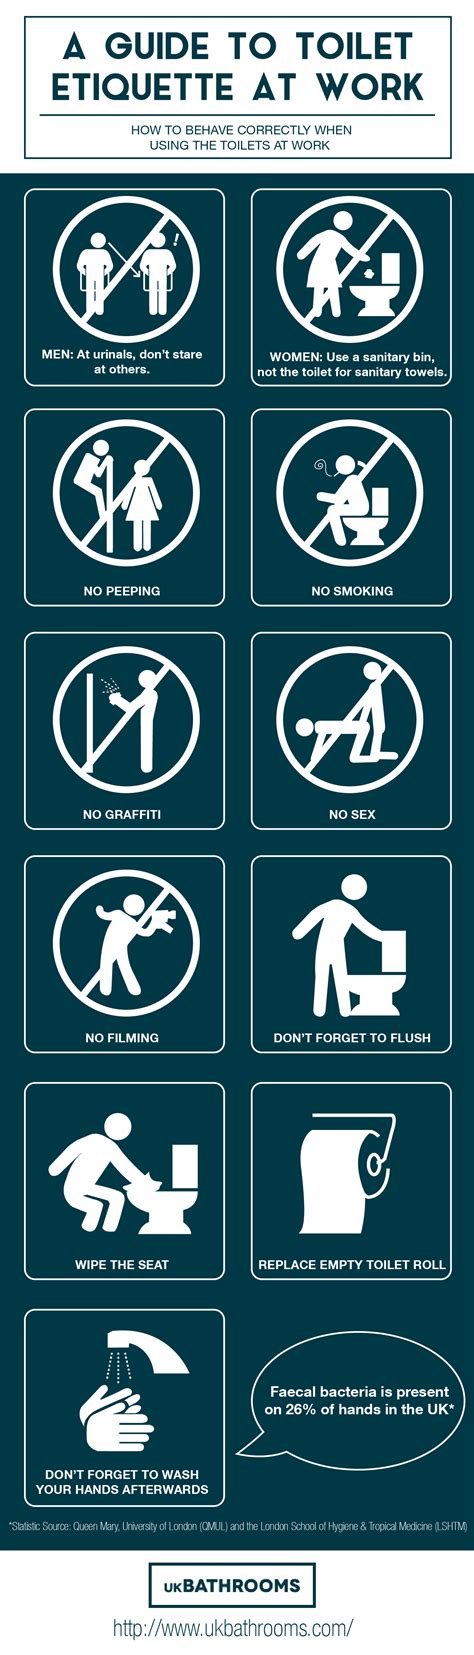 Bathroom Etiquette In The Workplace